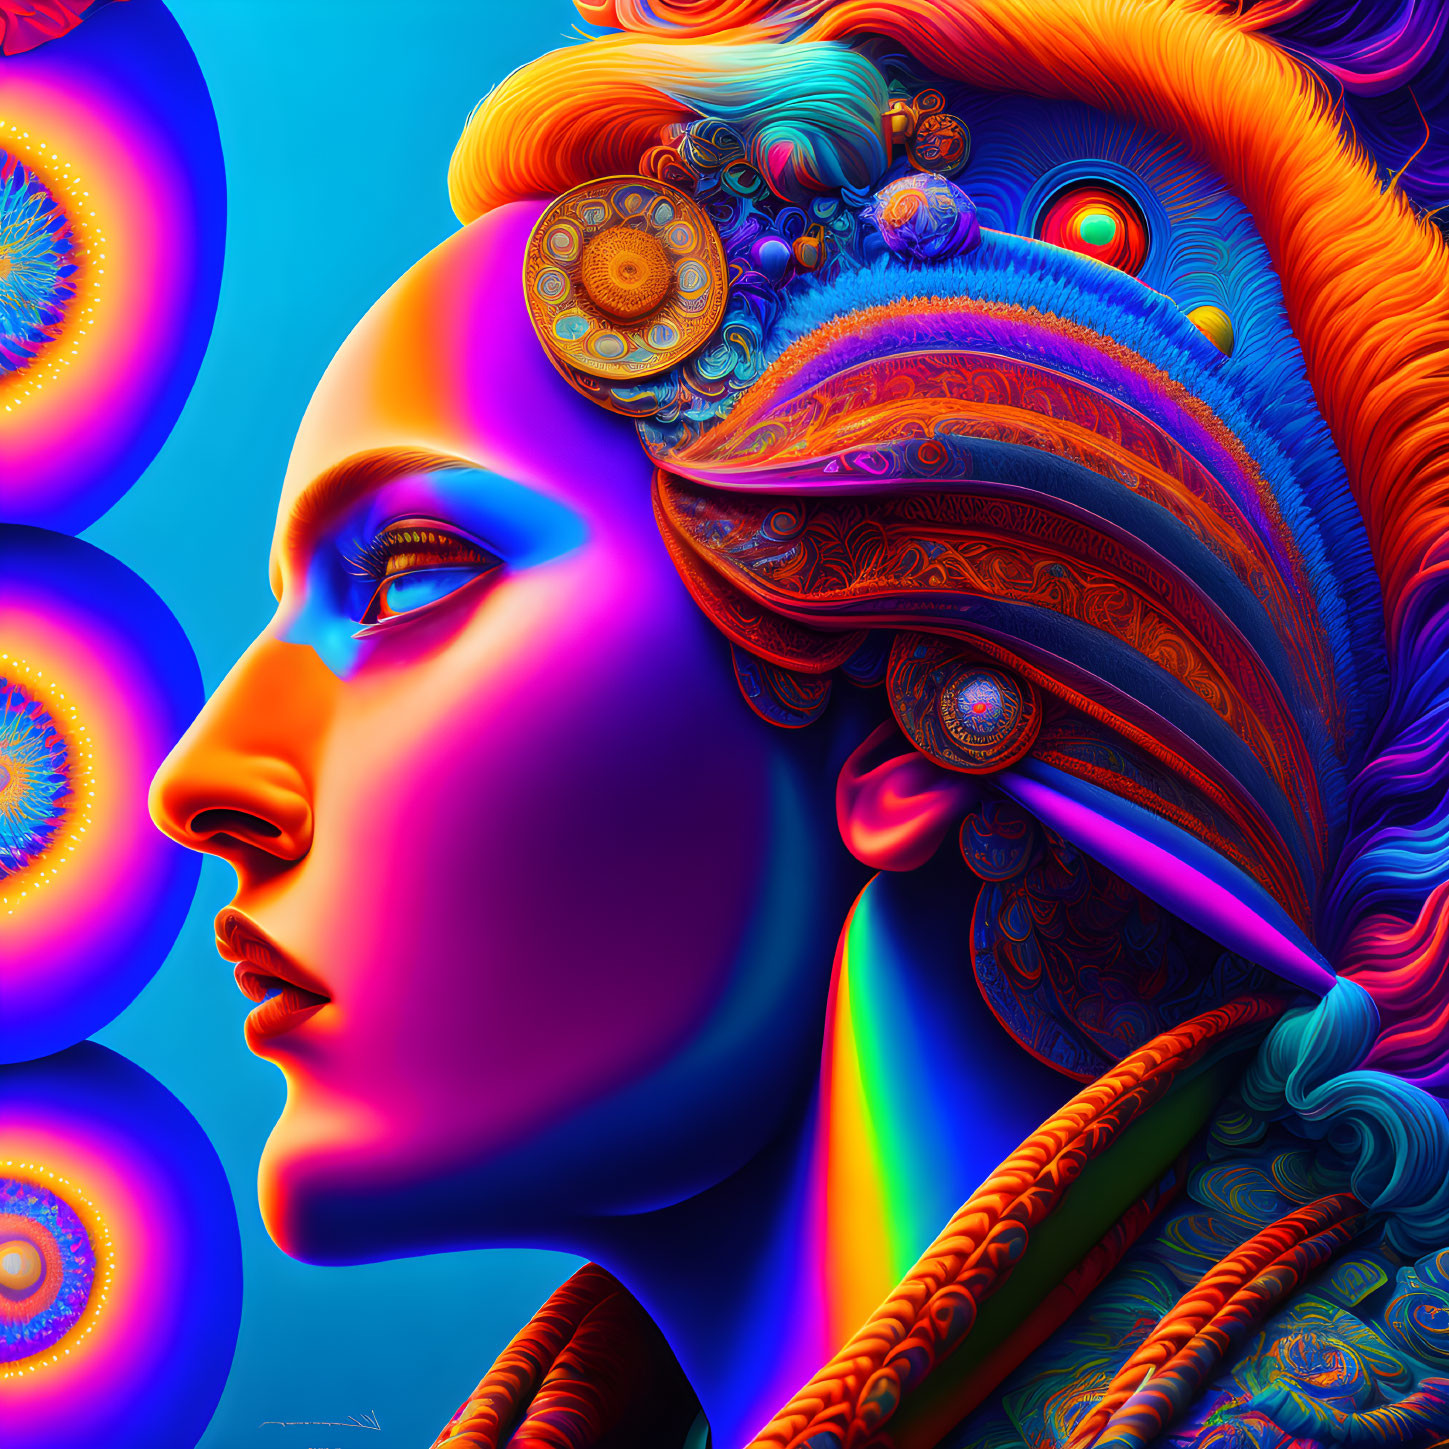 Colorful digital artwork: Woman's profile with mechanical elements in hair on neon blue background